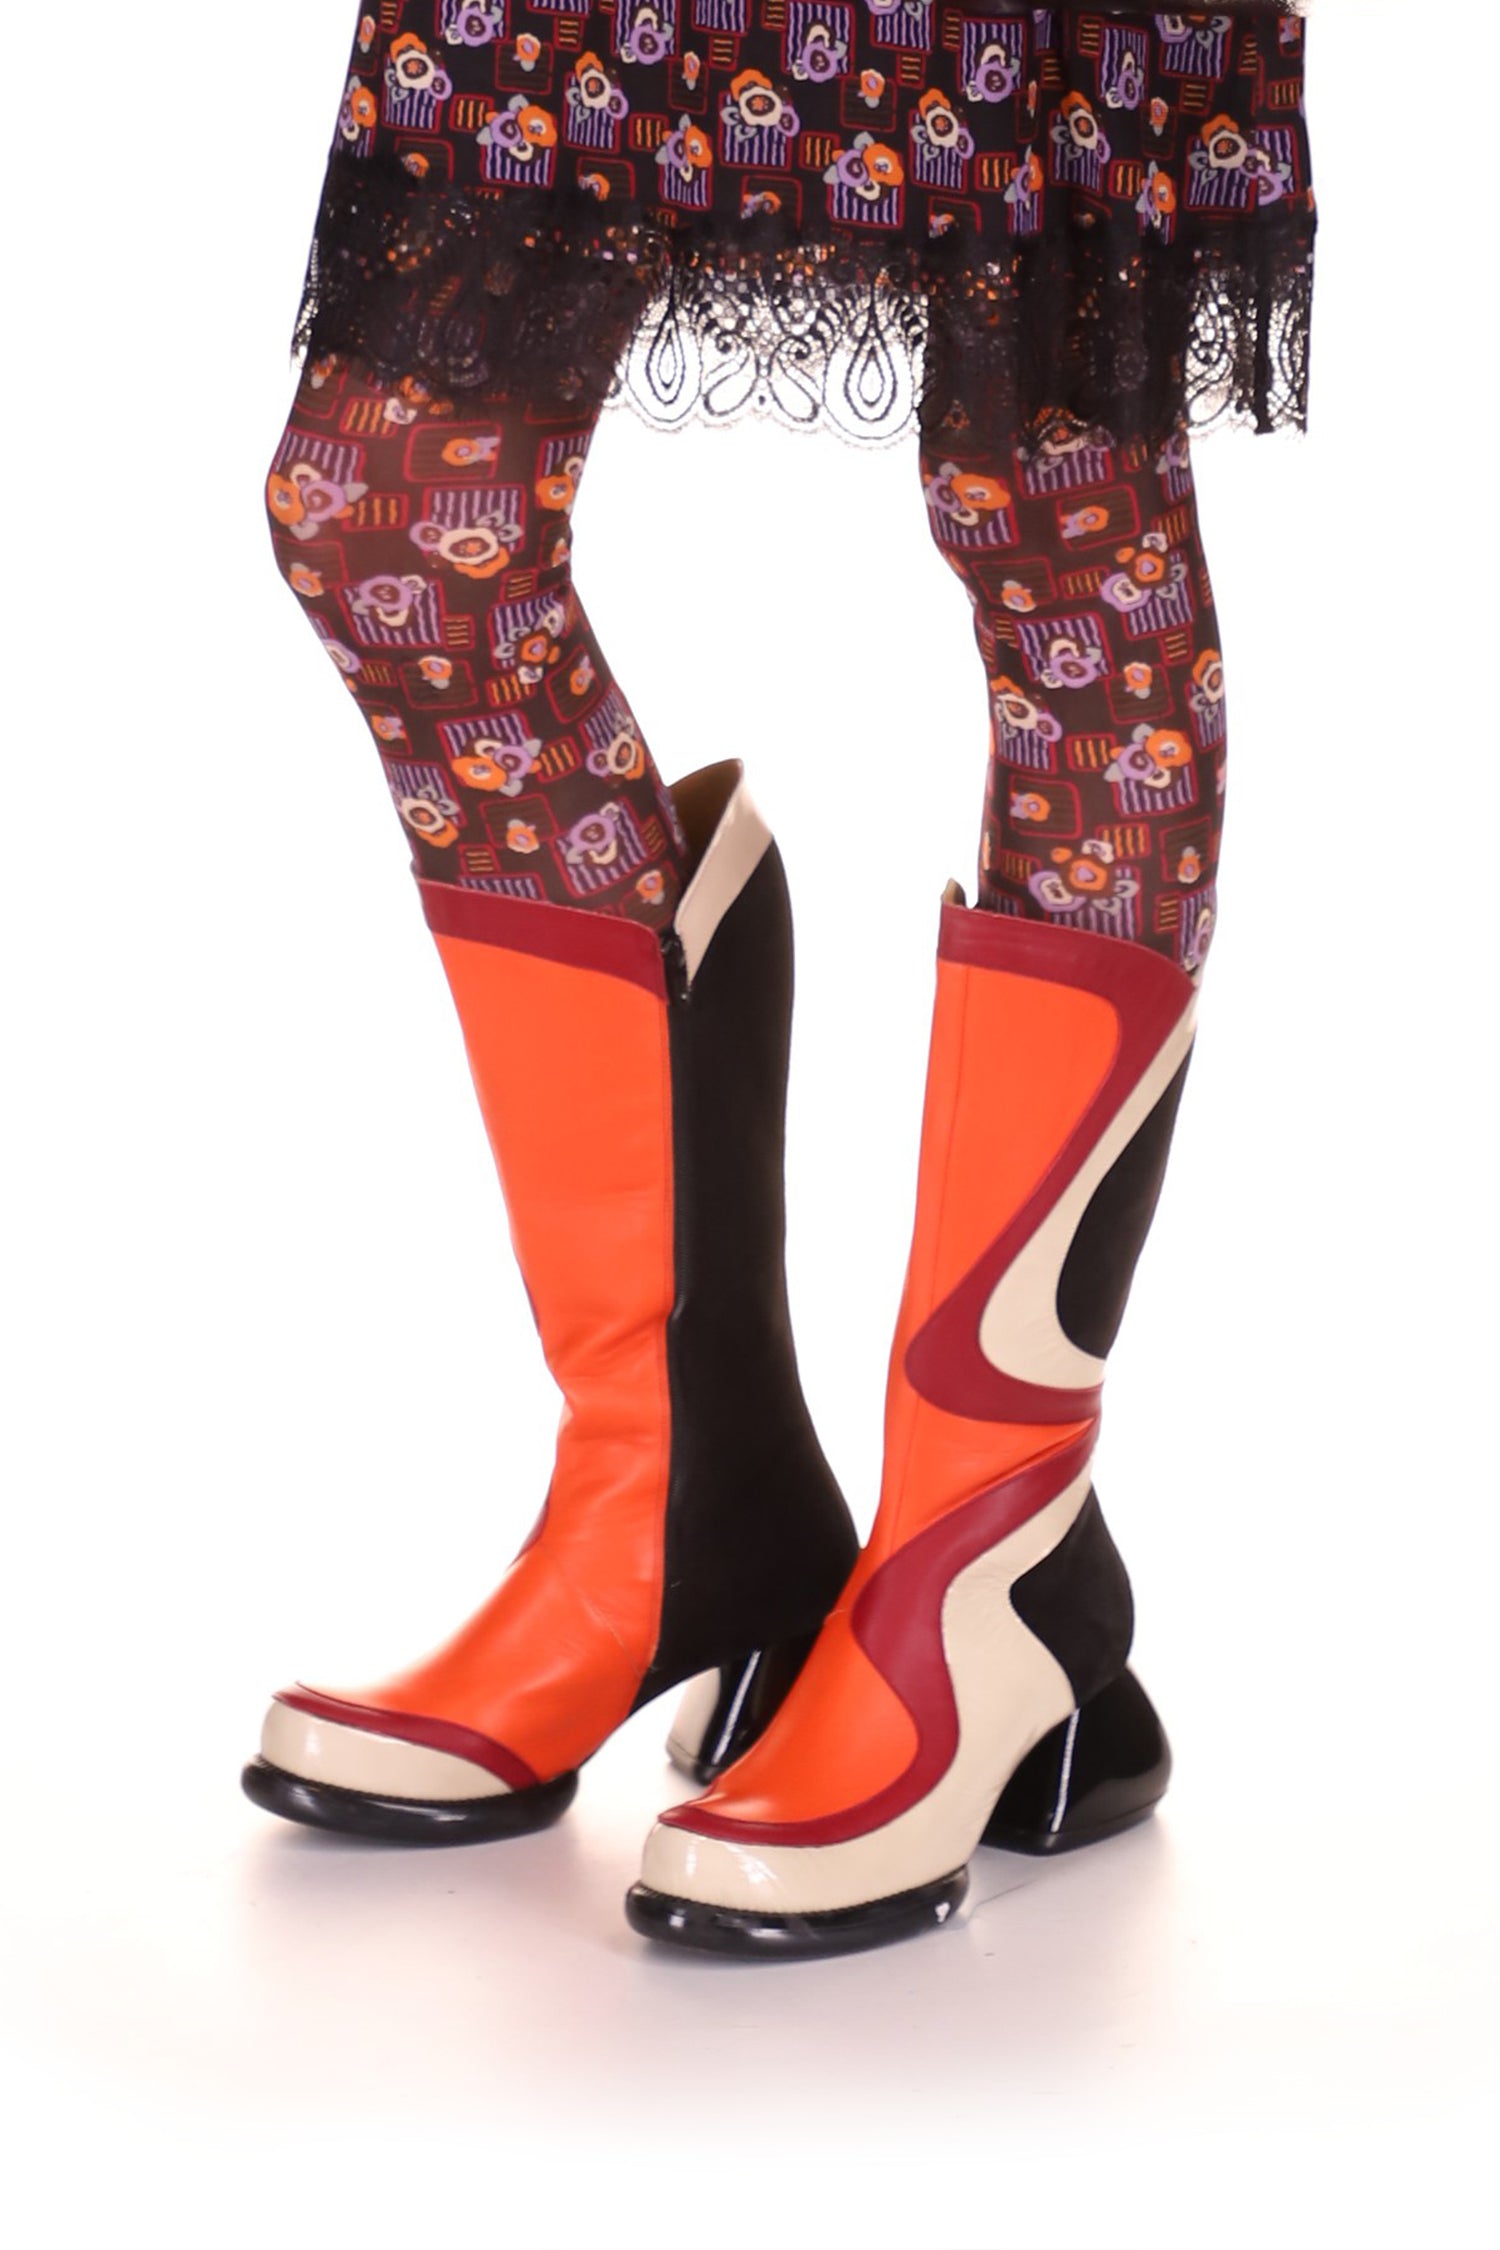 Psychedelic orange wavy design with red and white highlight, black in the back, sole, and heels